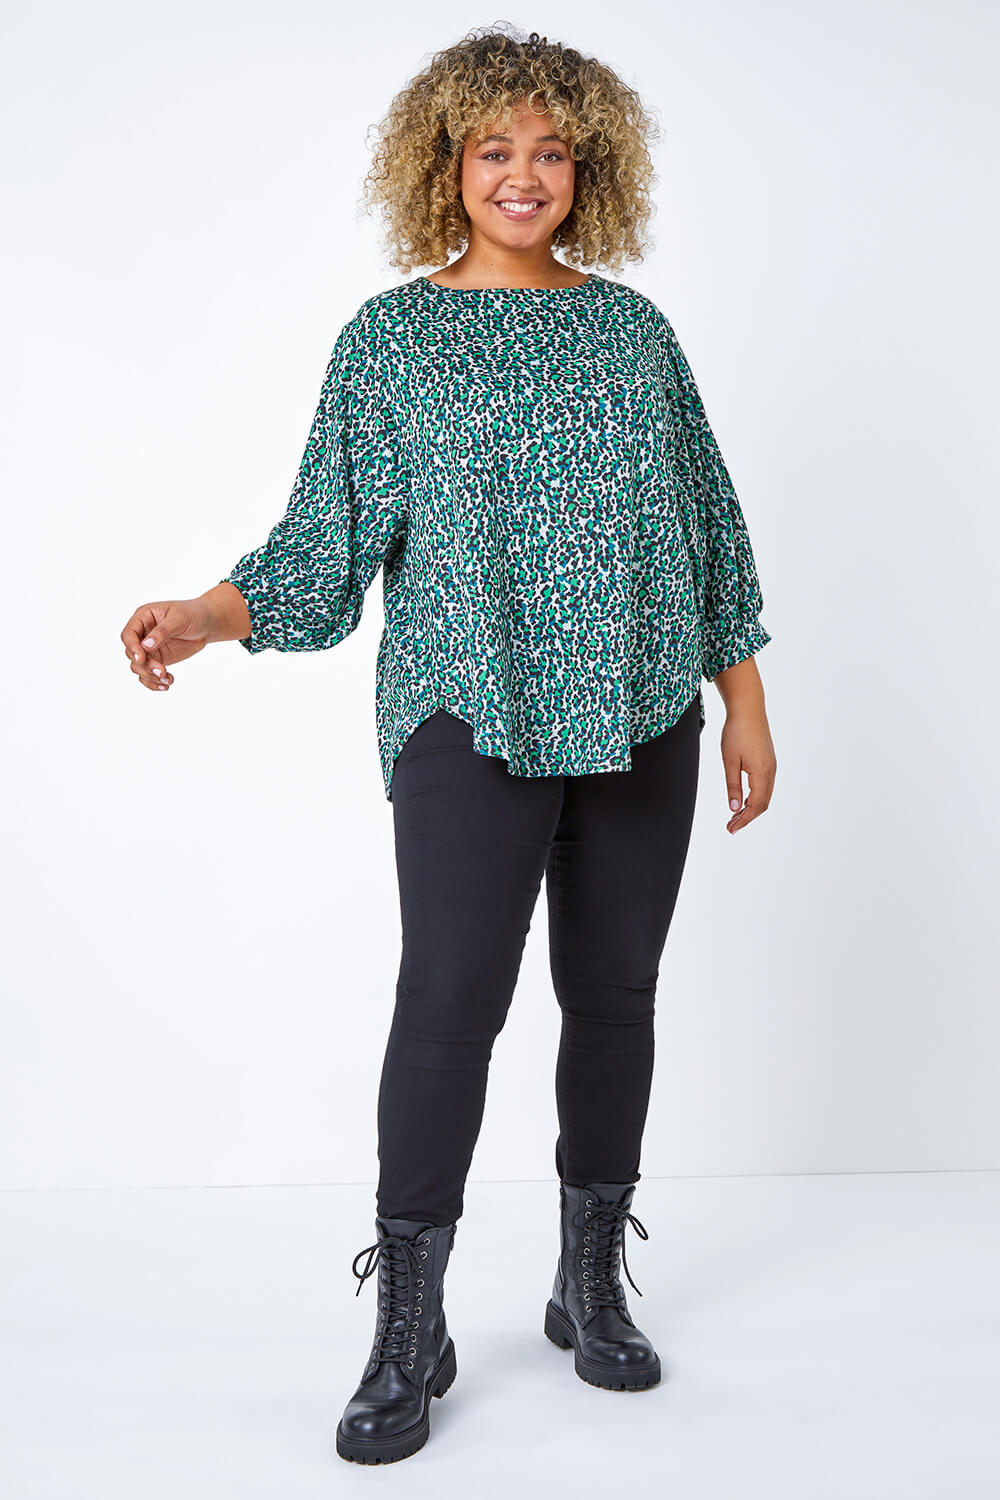 Green Curve Animal Print Stretch Top, Image 2 of 7